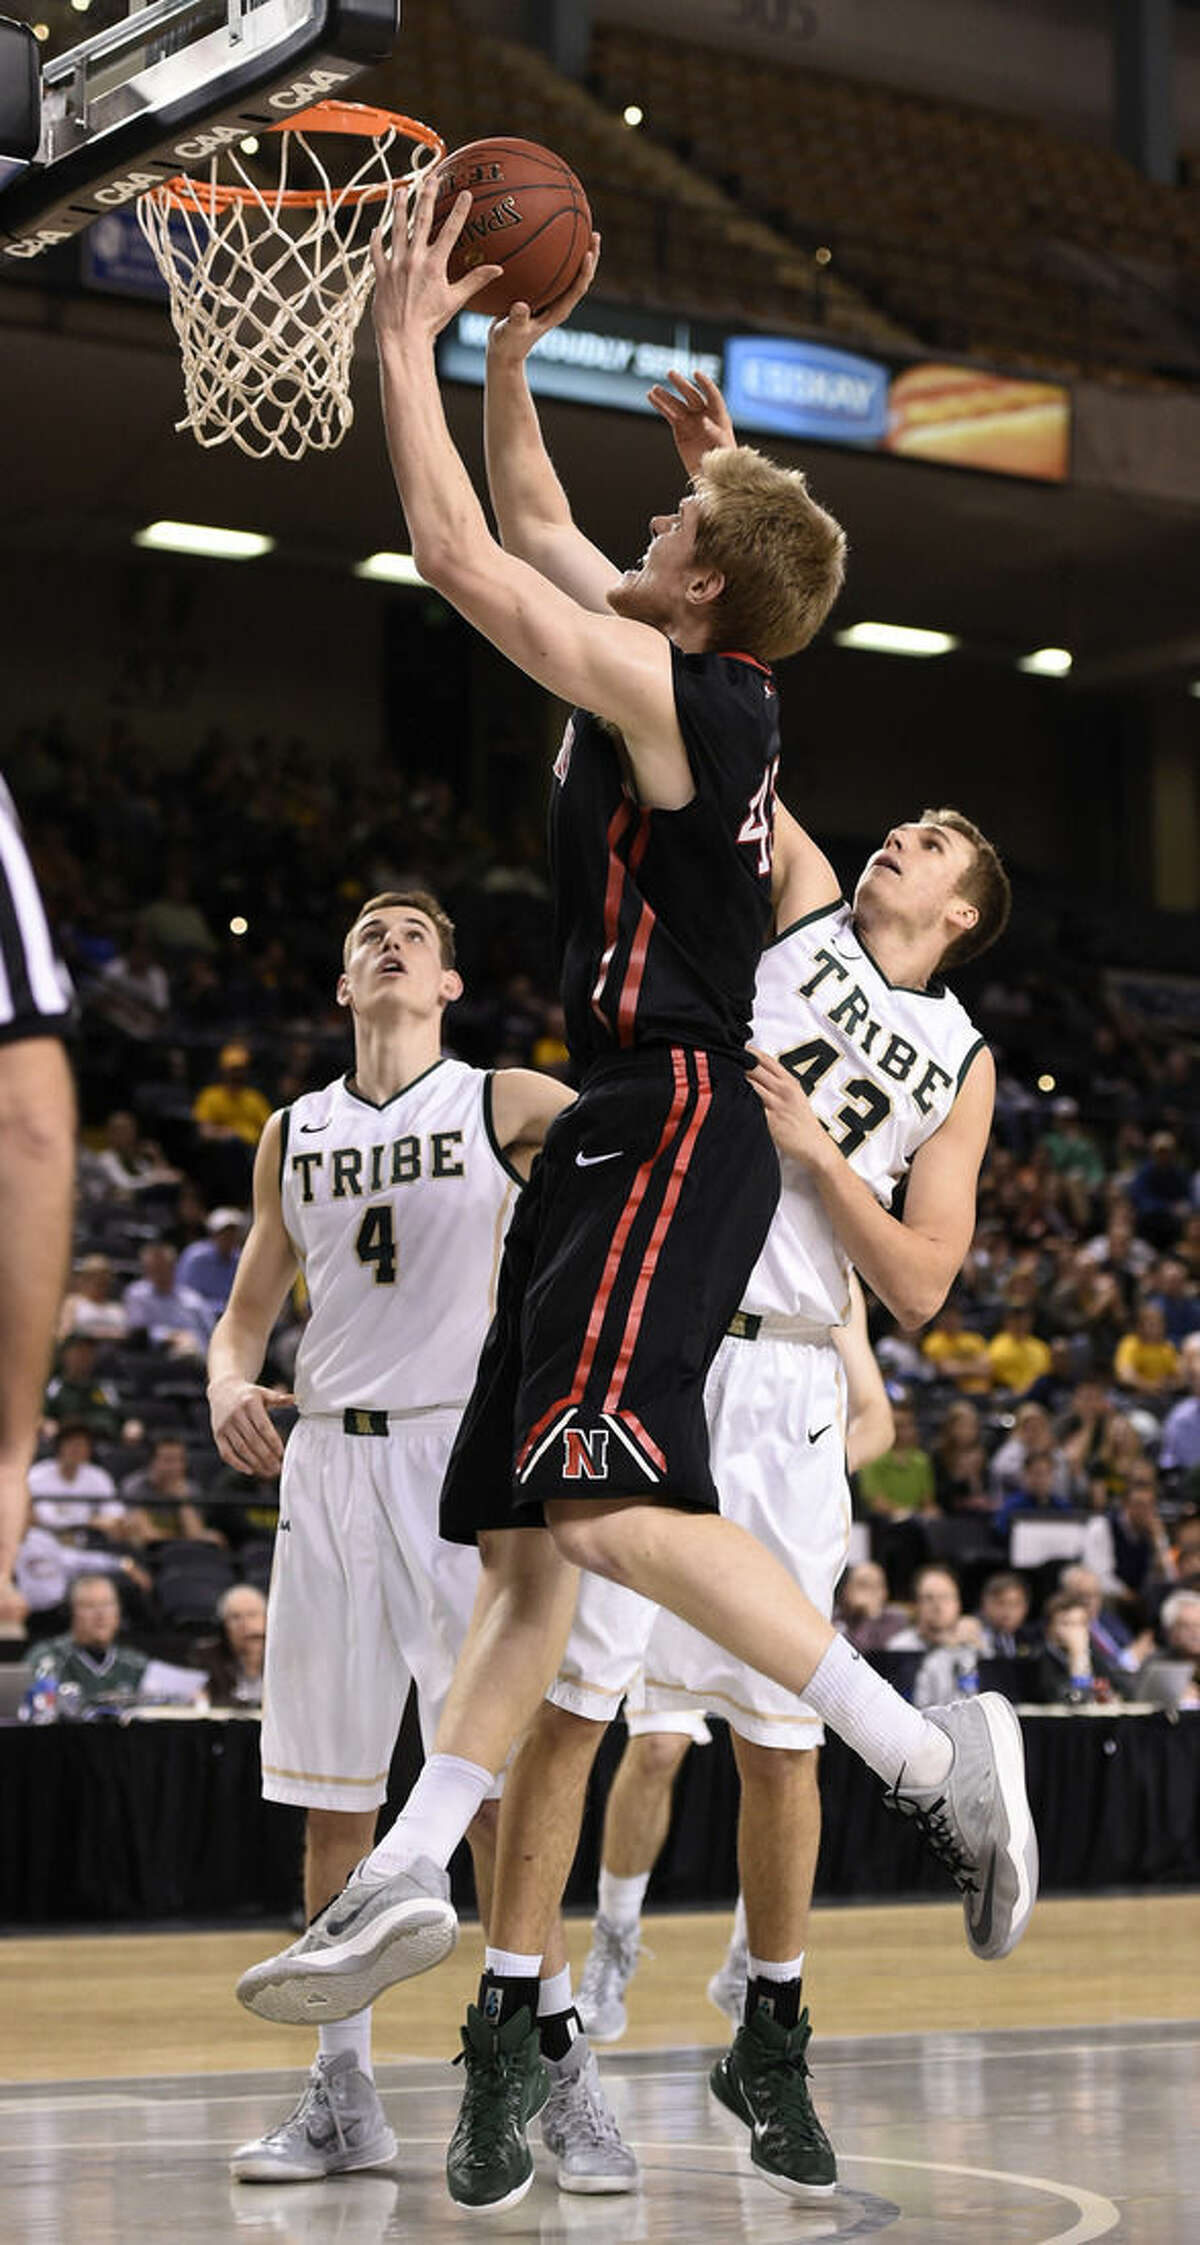 Northeastern's Scott Eatherton, left, shoots as William and Mary's Tom Schalk tries to block in the half of an NCAA college basketball game in the CAA Championship basketball tournament Monday, March 9, 2015, in Baltimore. (AP Photo/Gail Burton)